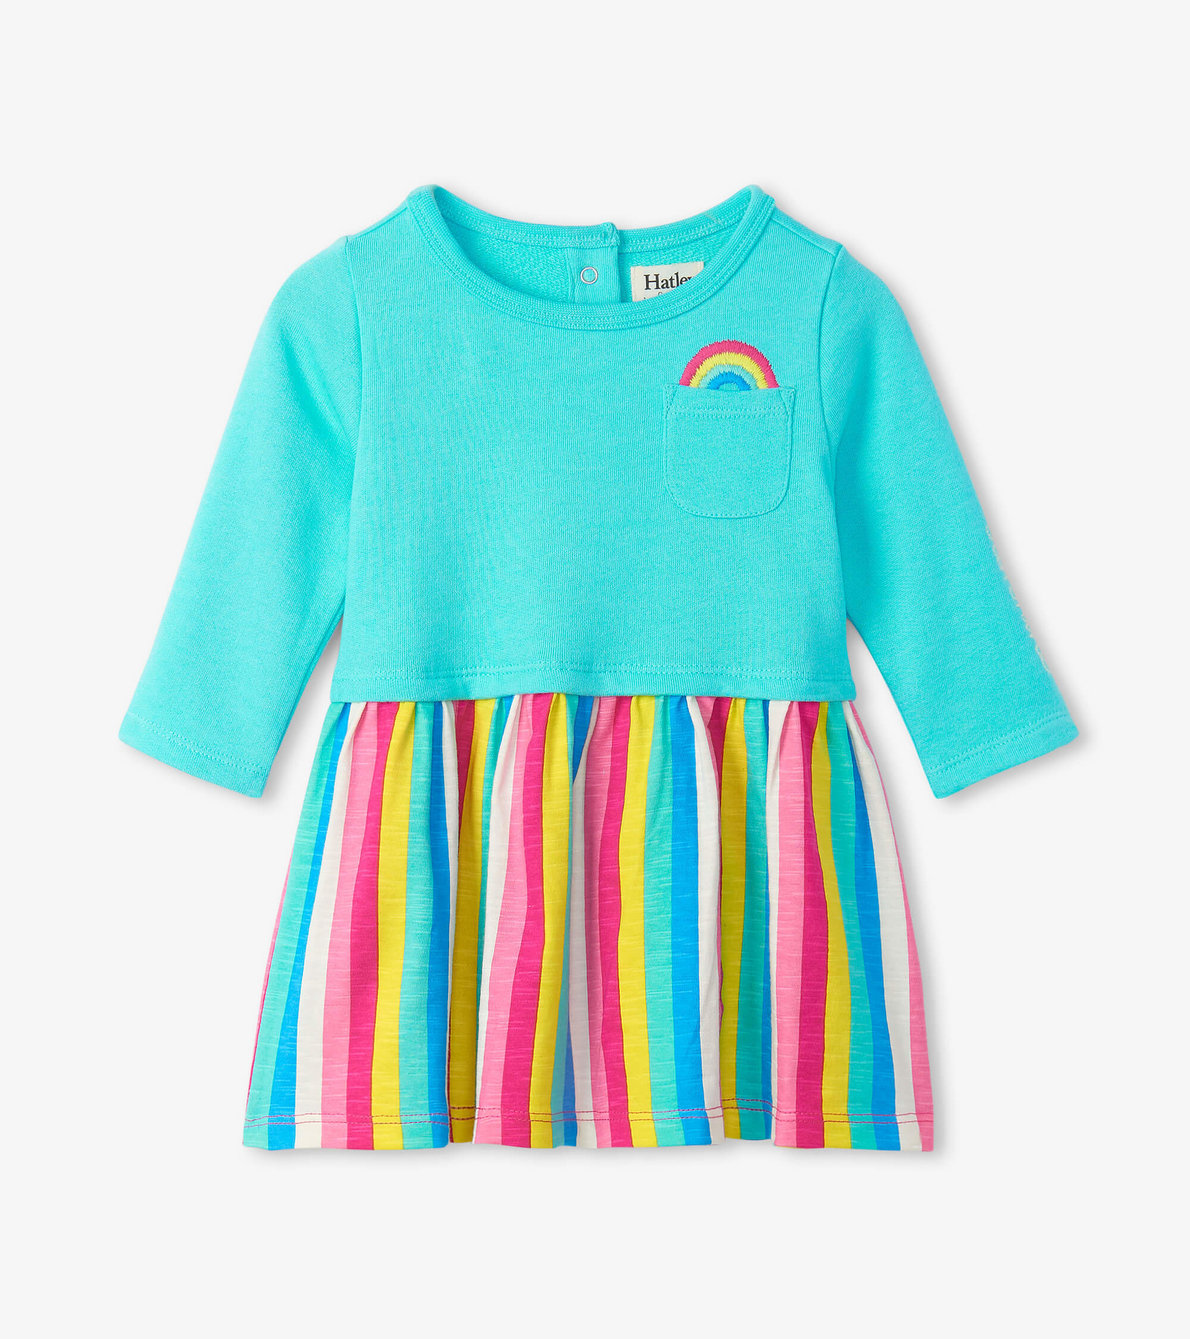 View larger image of Radiant Rainbow Layered Knit Baby Dress